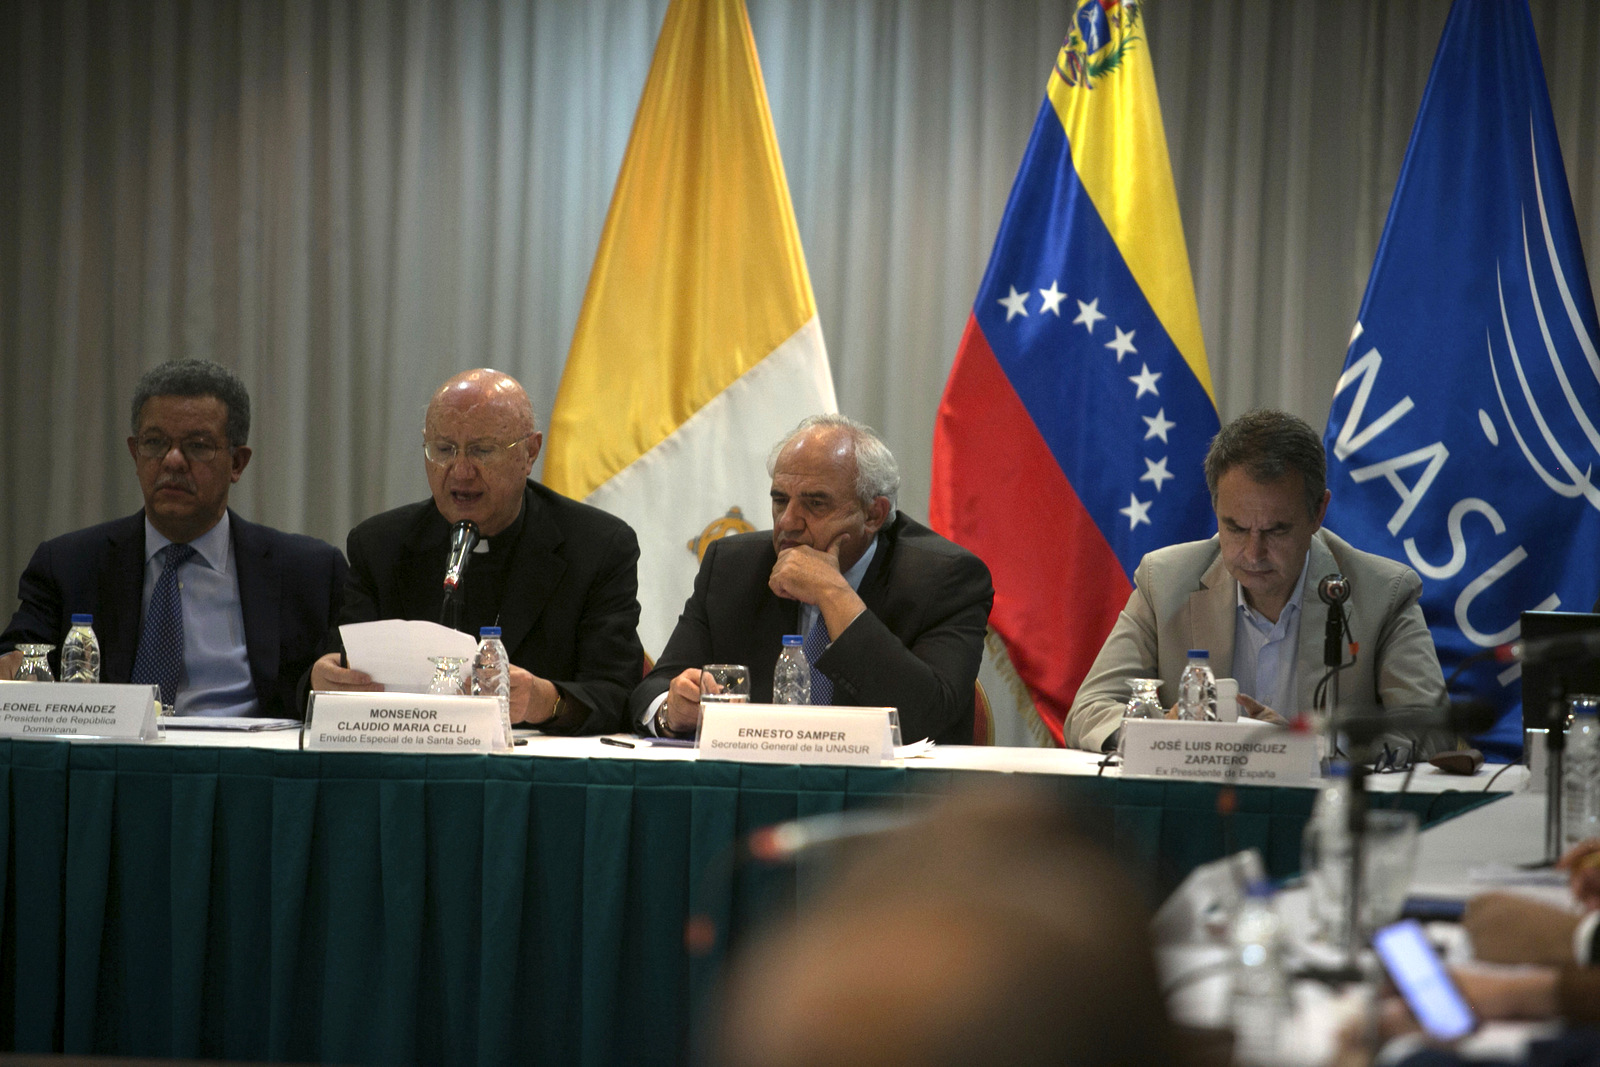 International mediators, from left to right, Dominican Republic's former President Leonel Fernandez, Vatican envoy Archbishop Claudio Maria Celli, Colombian former President Ernesto Samper, and Spain's former Prime Minister Jose Luis Rodriguez Zapatero, sit at the dialogue table between Venezuela's government and its opposition, in Caracas, Venezuela, Nov, 11 , 2016. (AP/Alejandro Cegarra)